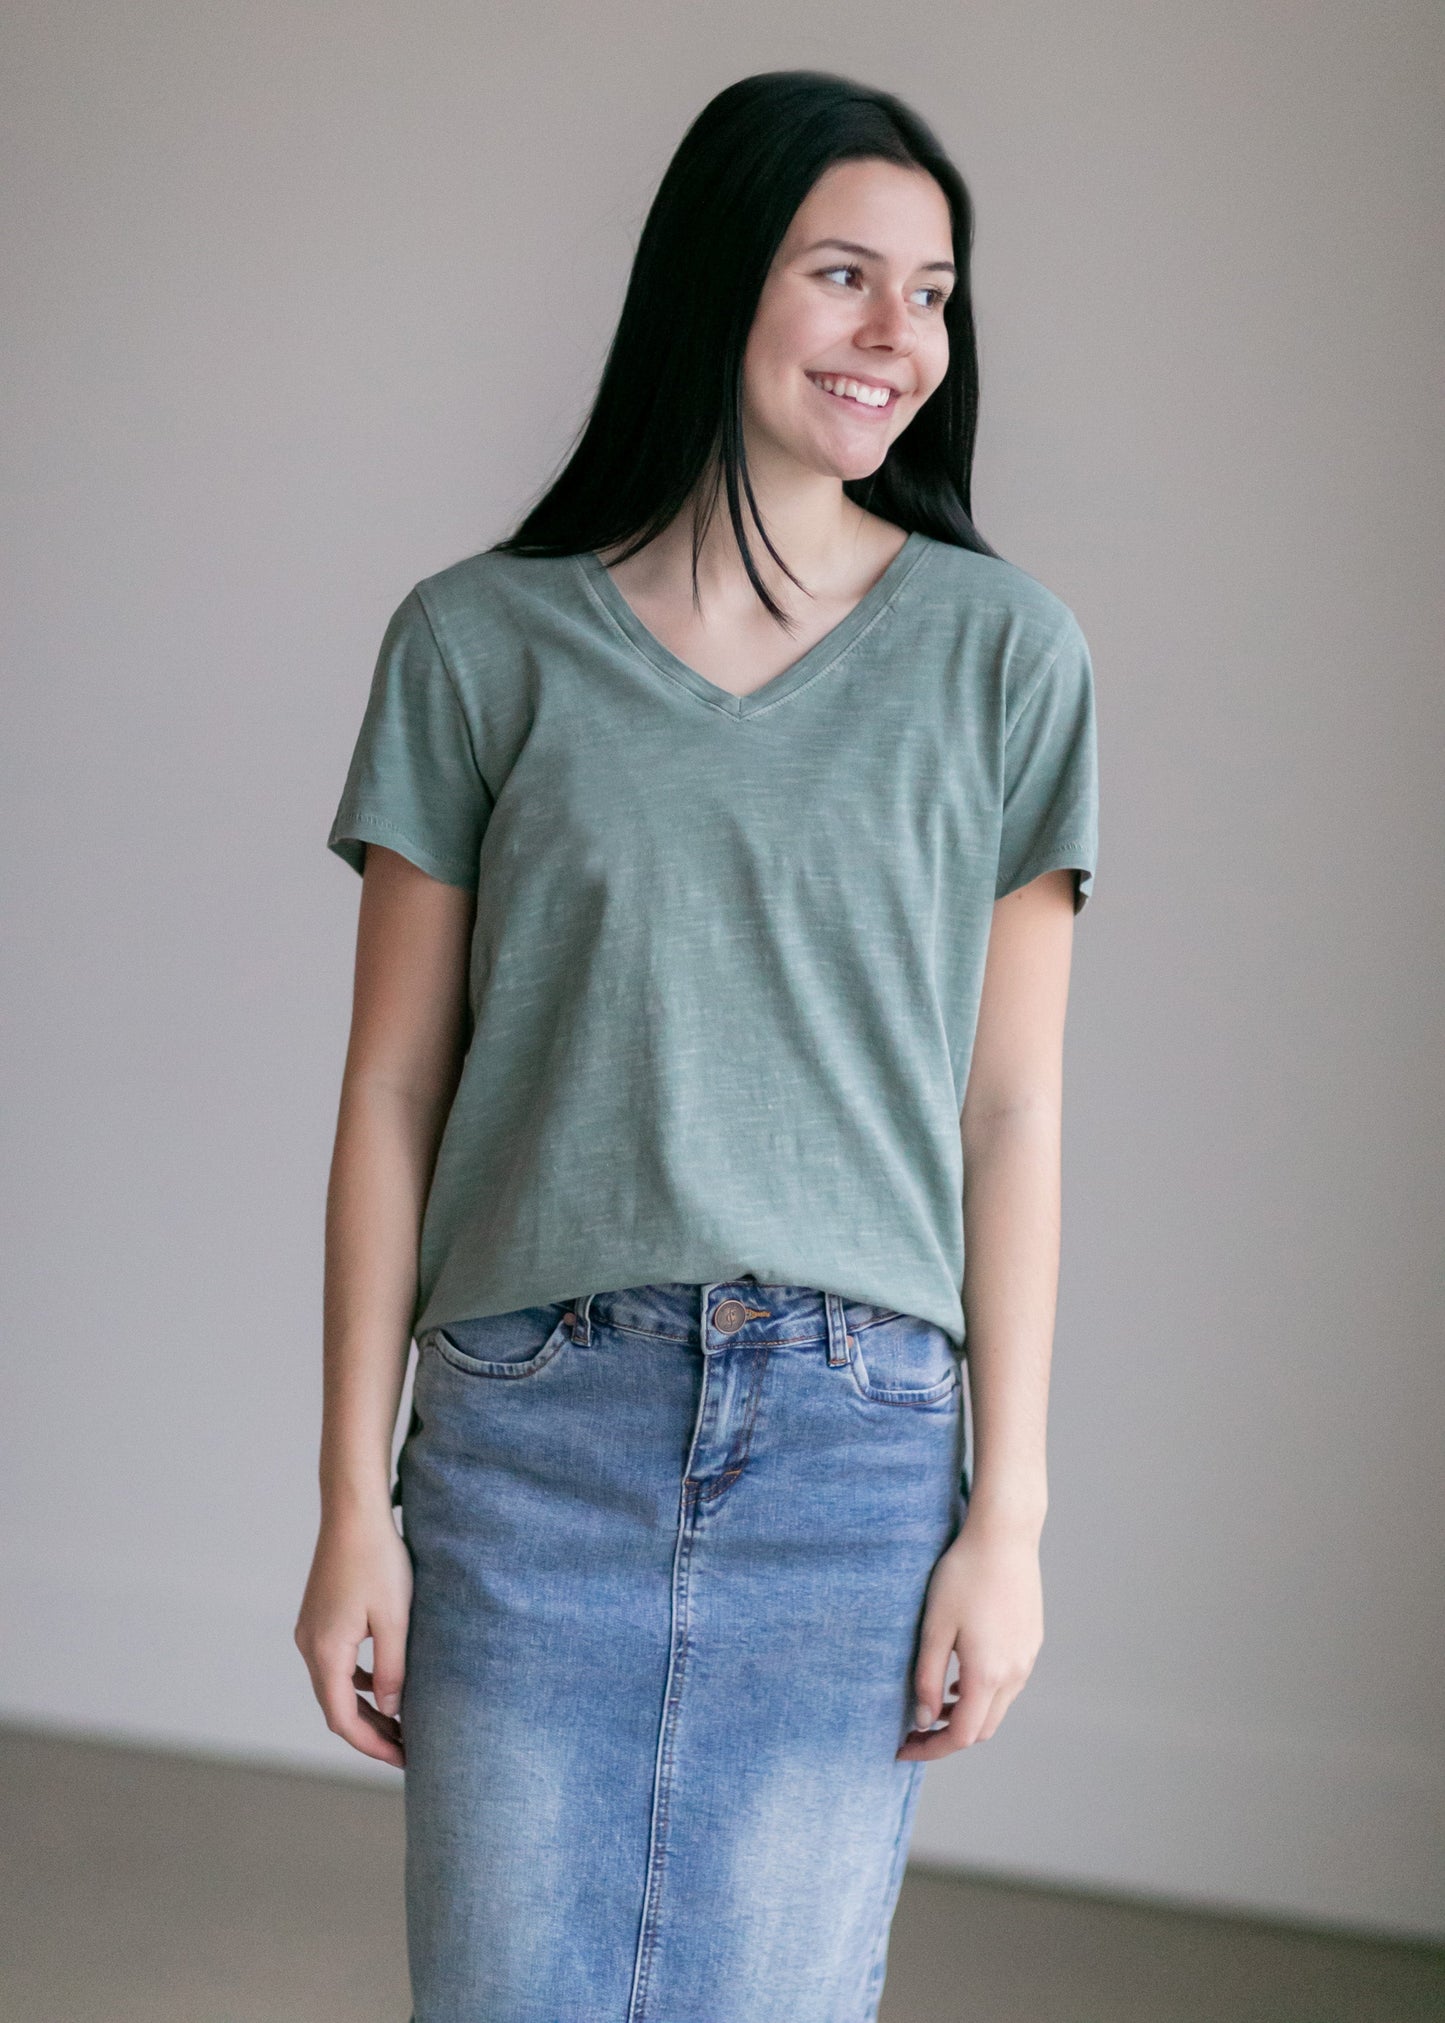 The Classic Short Sleeve V-Neck Top by Lucky Brand is a wardrobe staple that will go with all the things! This classic V-neck t-shirt is tailored in a relaxed fit from soft 100% cotton in a range of colors with a slight heathered look. Wear with your favorite bottoms and cozy layers for effortless styling!